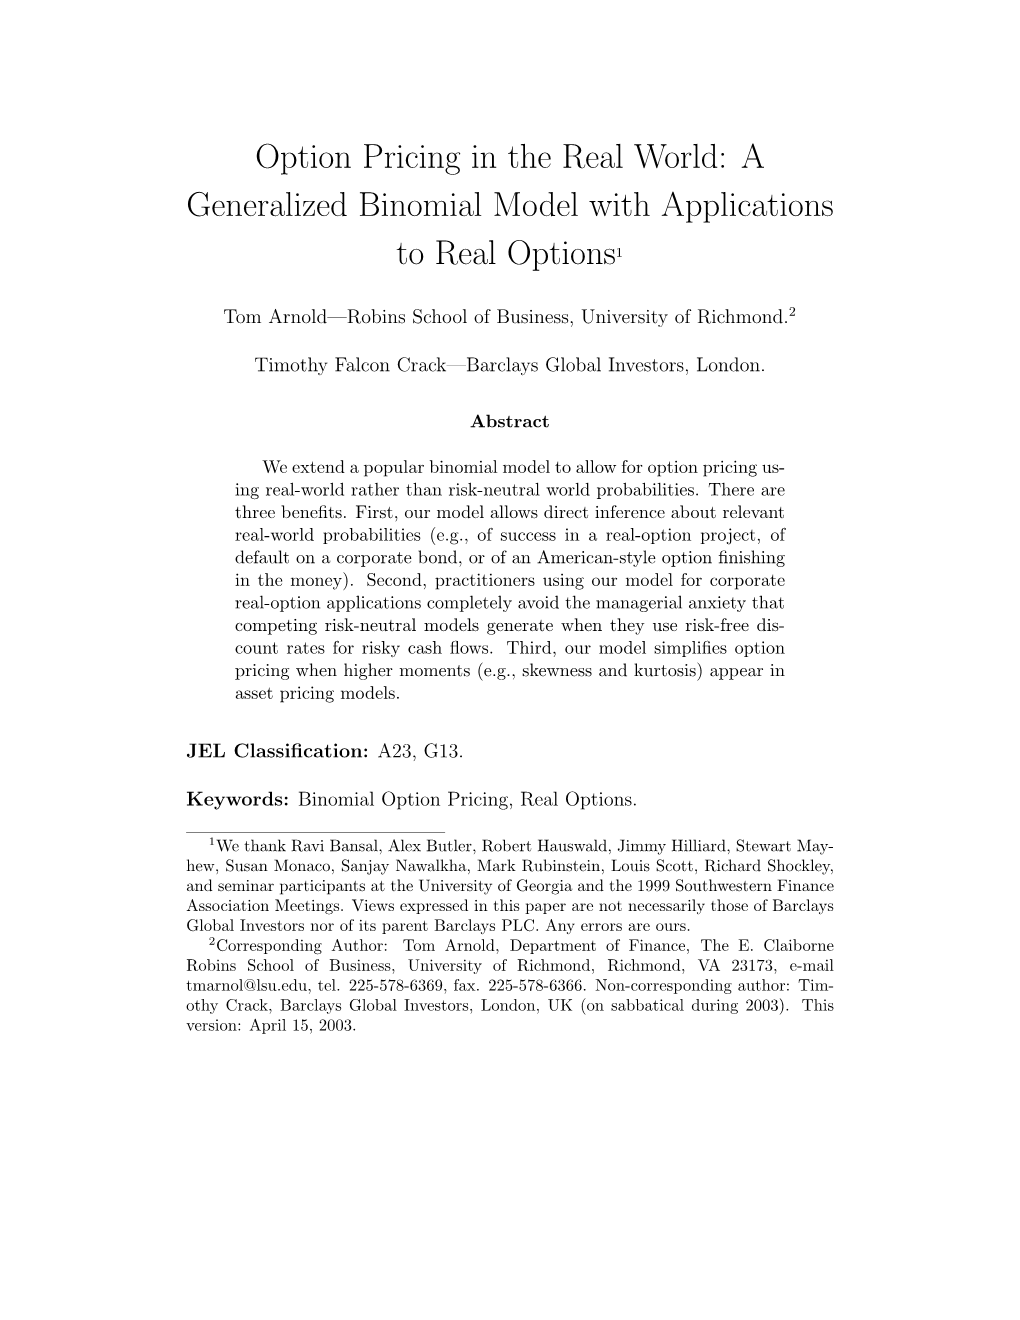 Option Pricing in the Real World: a Generalized Binomial Model with Applications to Real Options1